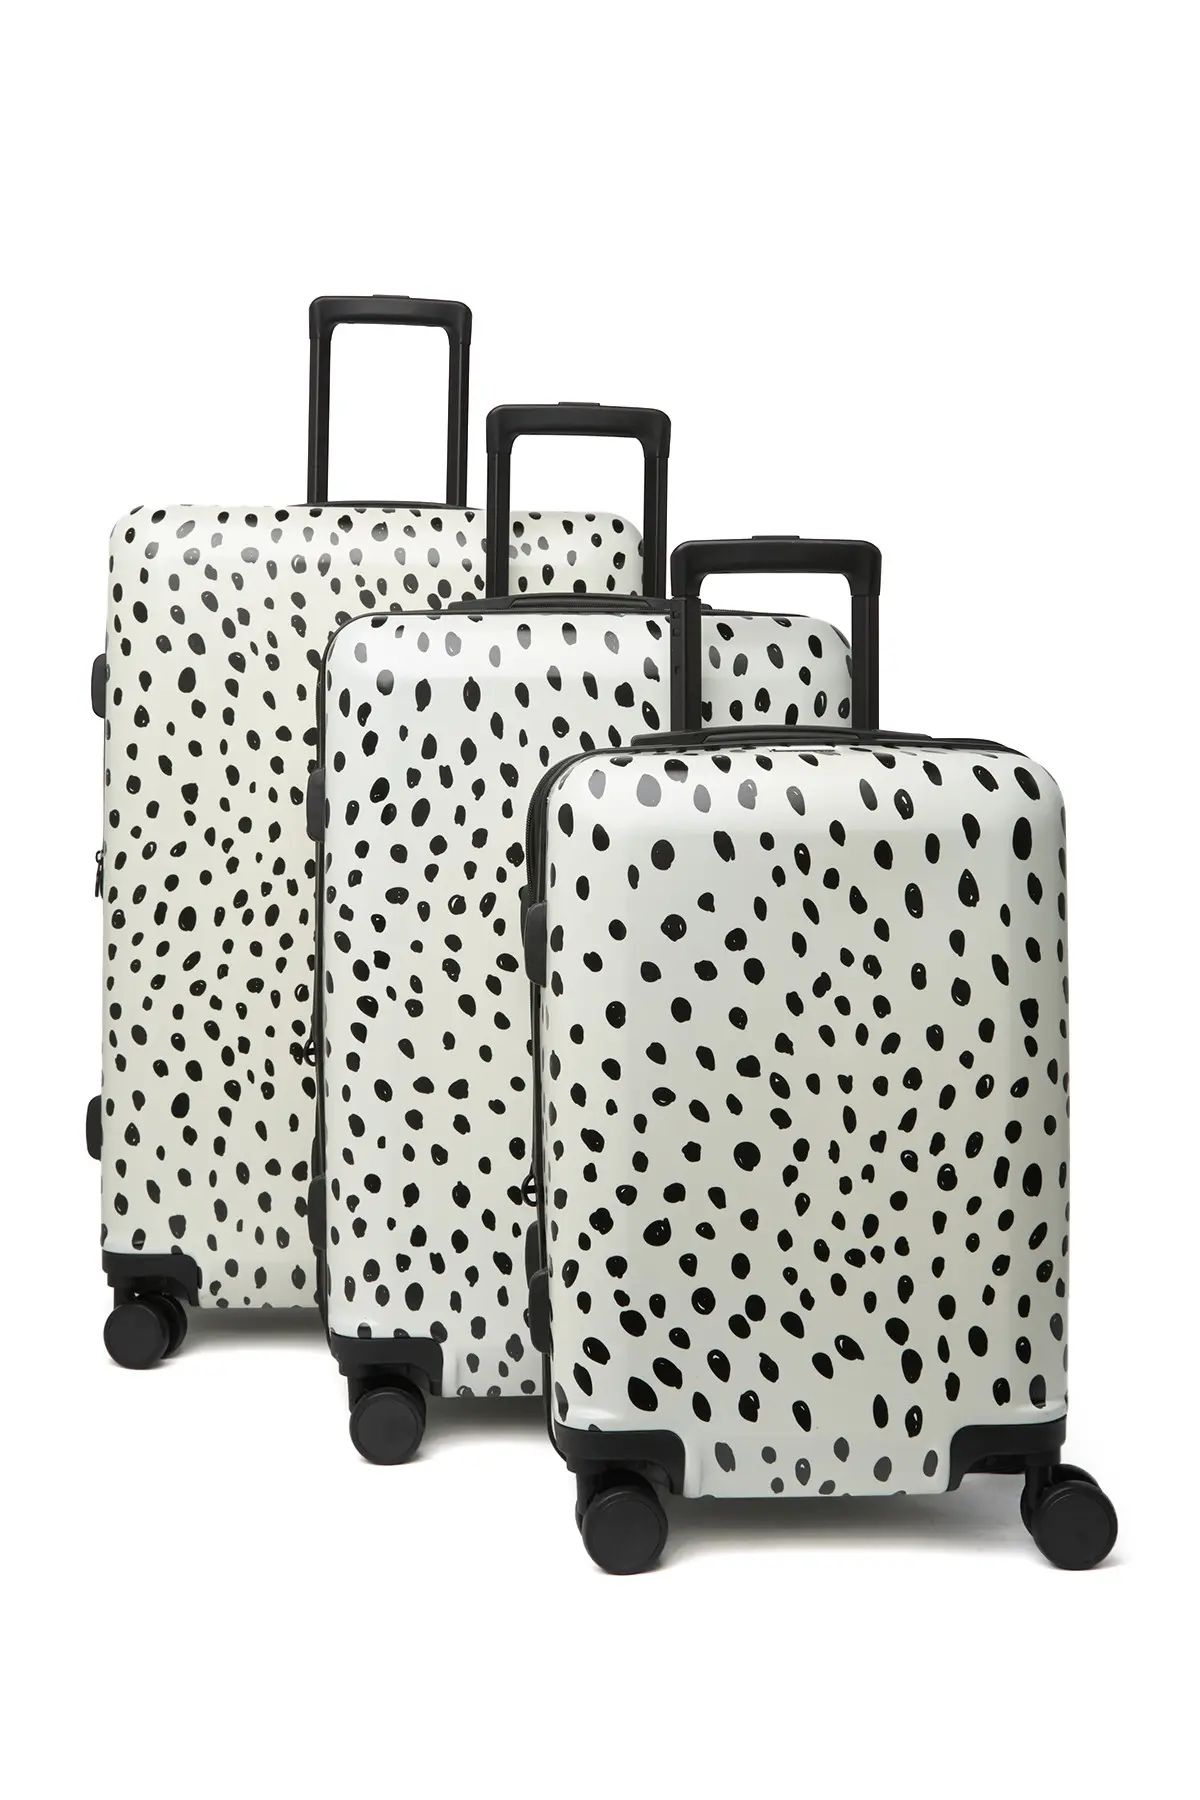 CALPAK LUGGAGE Chipp Collection 3-Piece Luggage Set at Nordstrom Rack | Nordstrom Rack